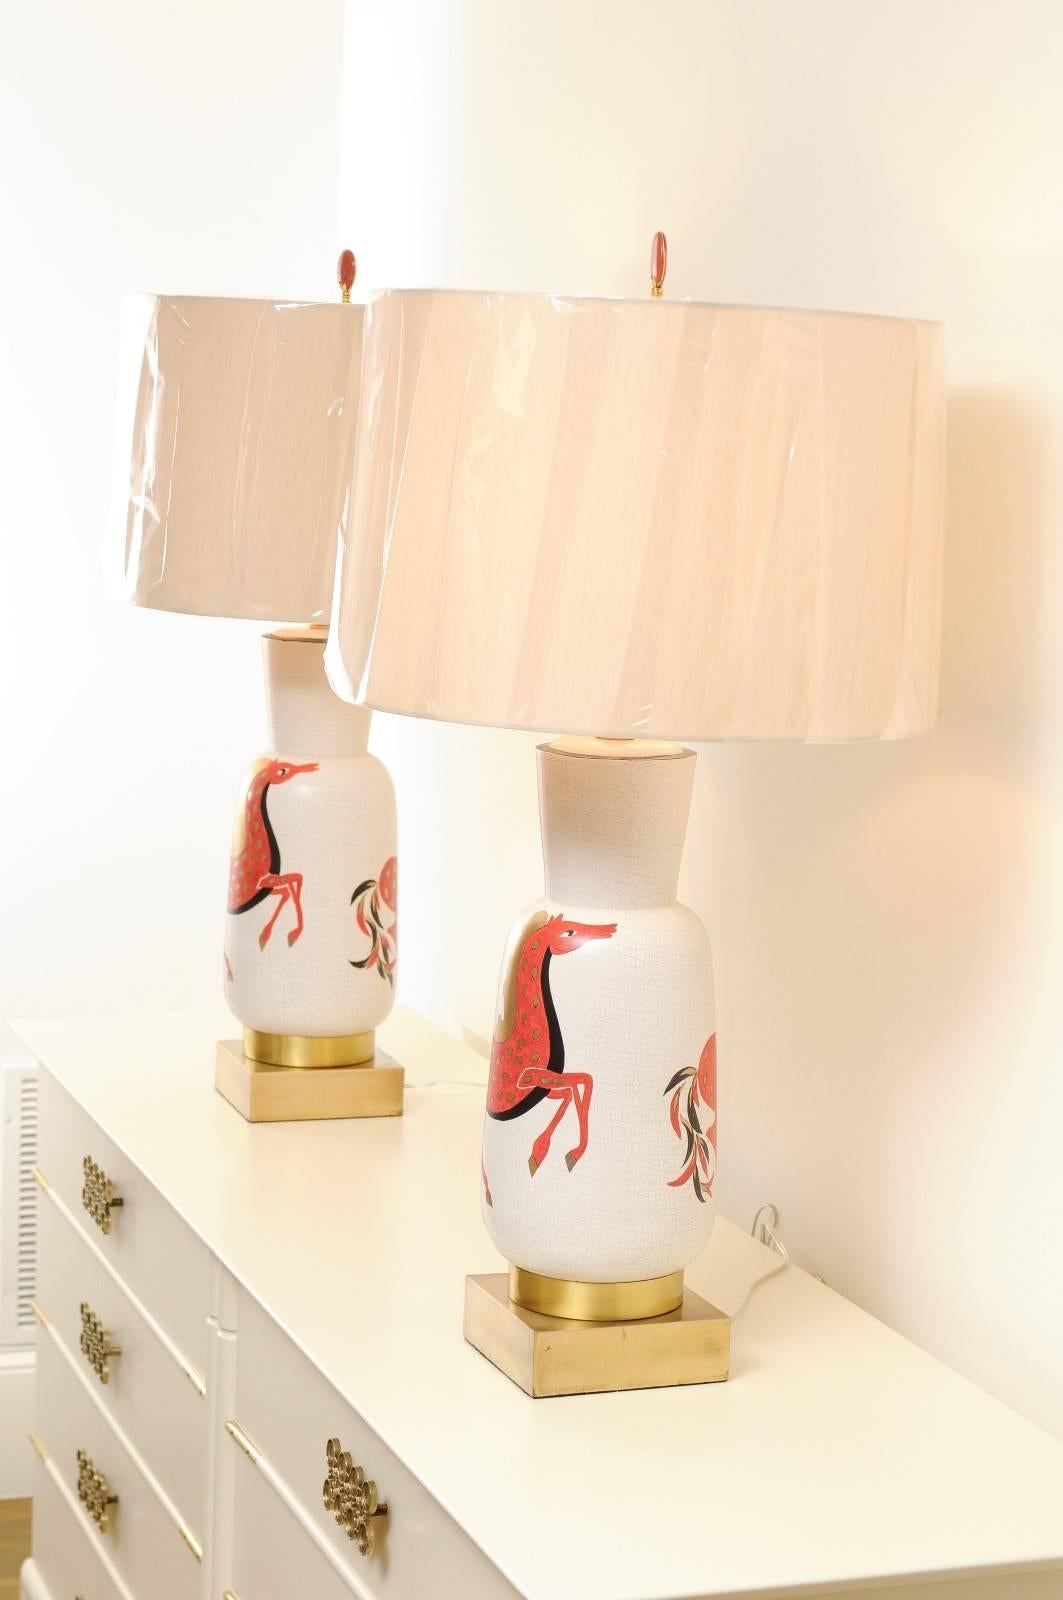 Spectacular Pair of Marbro Lamps by Ugo Zaccagnini, Italy, circa 1955 In Excellent Condition For Sale In Atlanta, GA